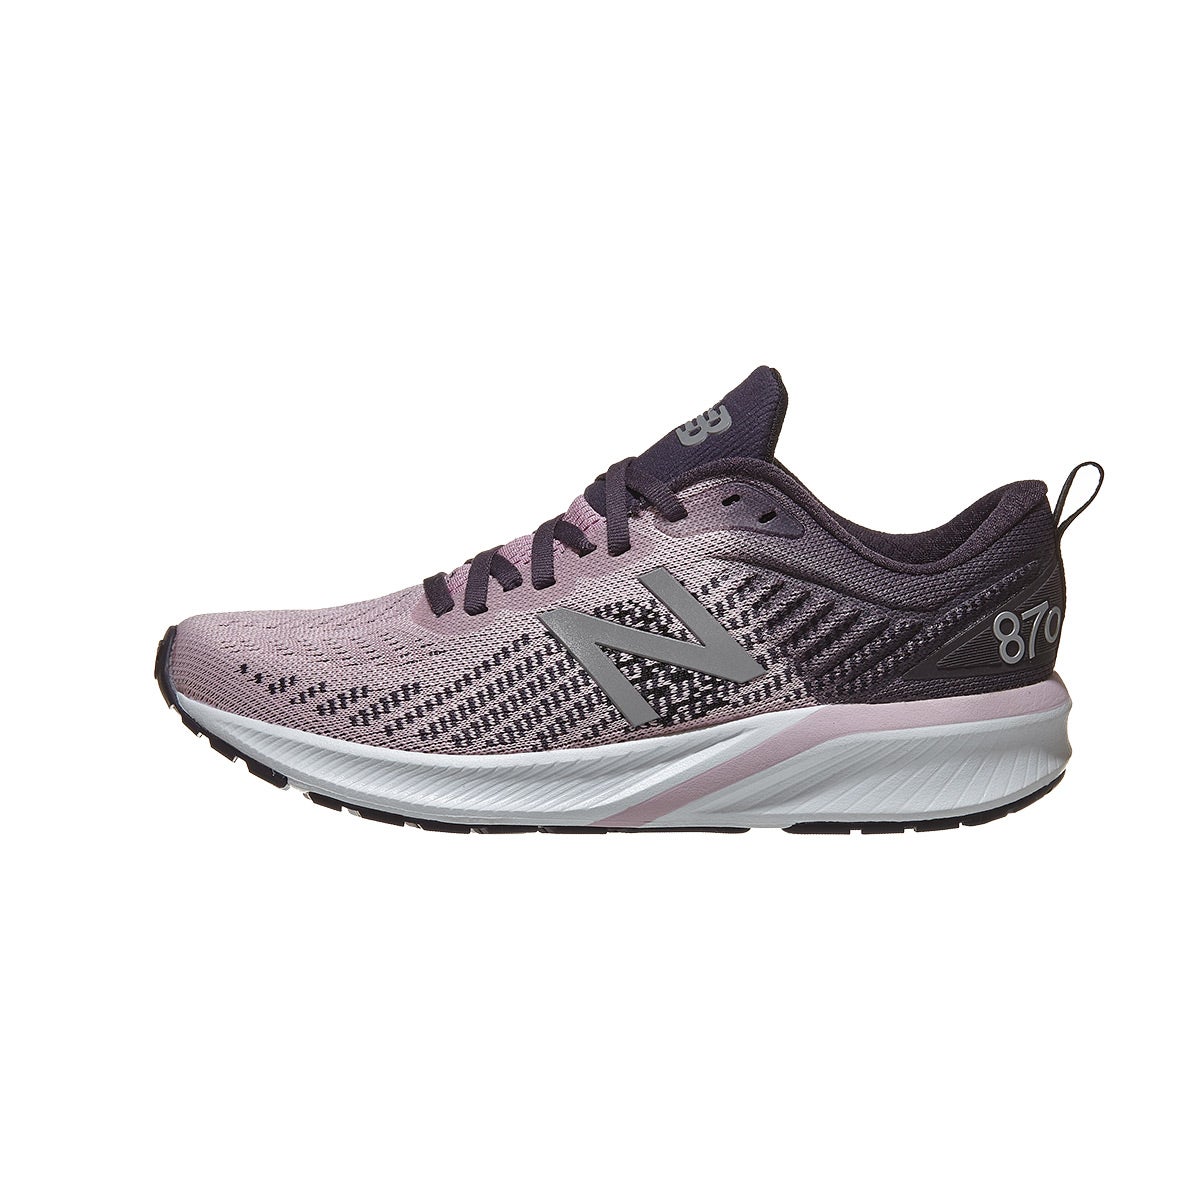 New Balance 870 v5 Women's Shoes Oxygen Pink/Violet 360° View | Running ...